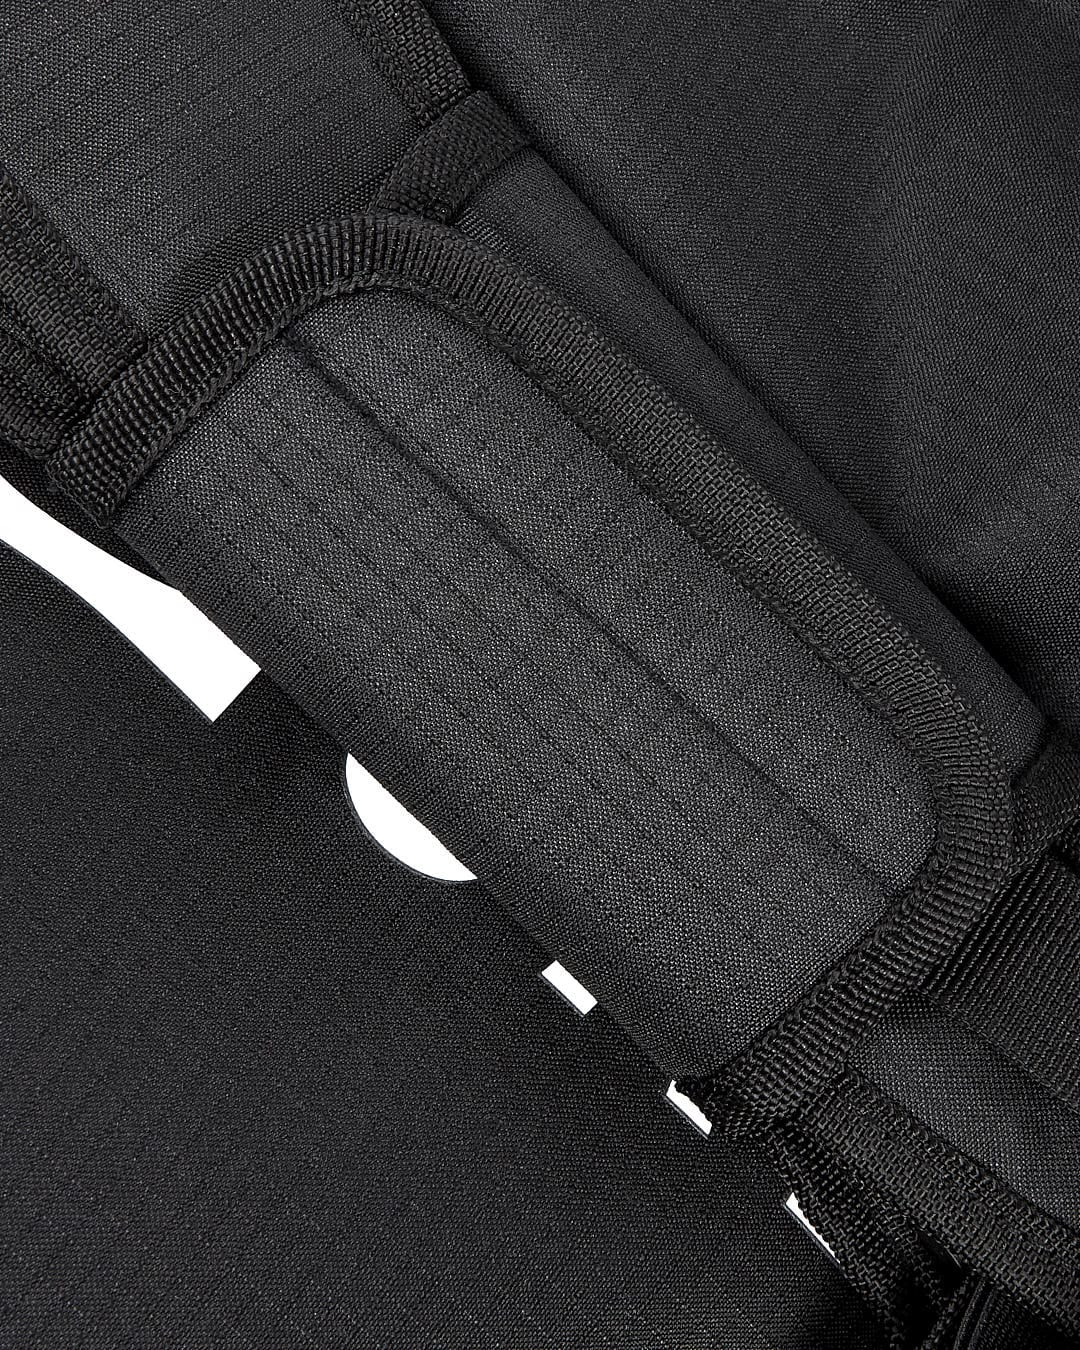 A close up of a Saltrock Mission - Holdall - Black backpack with a zipper.